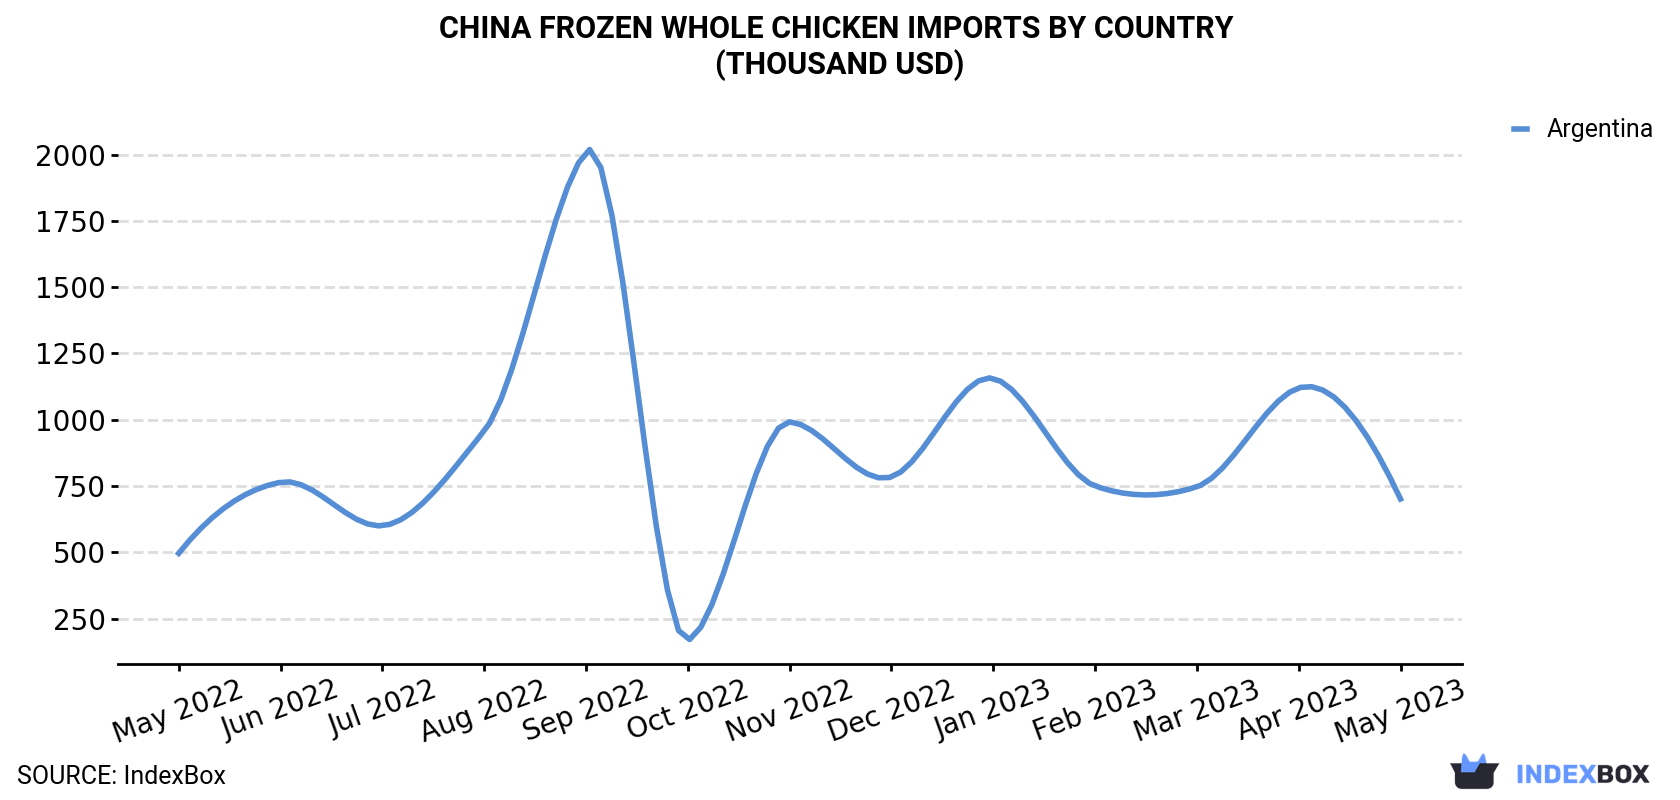 China Frozen Whole Chicken Imports By Country (Thousand USD)